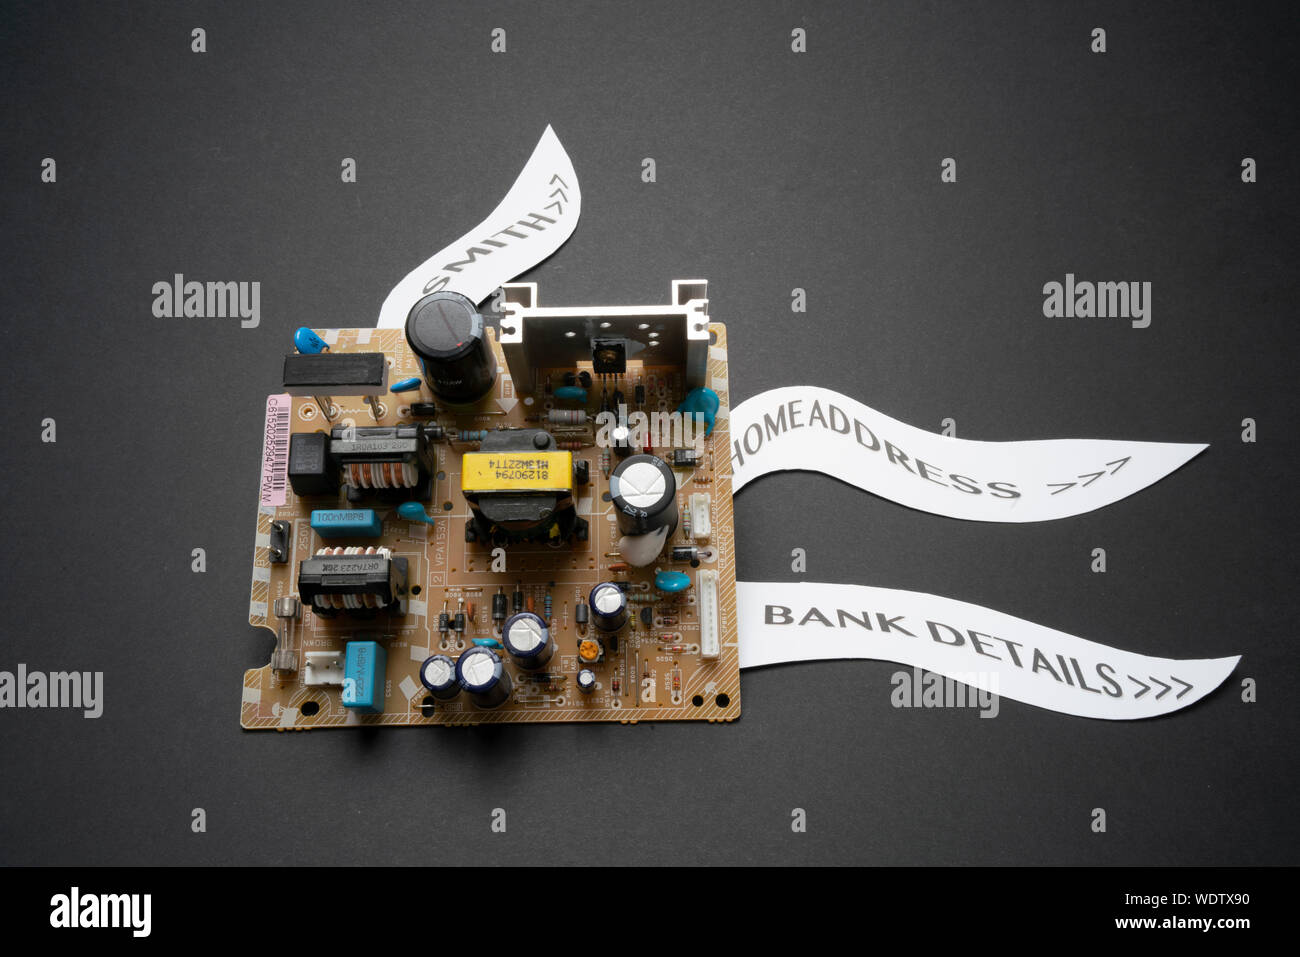 A circuit board with labels illustration data leaks, personal details and computer hacking in a big data warehousing world Stock Photo